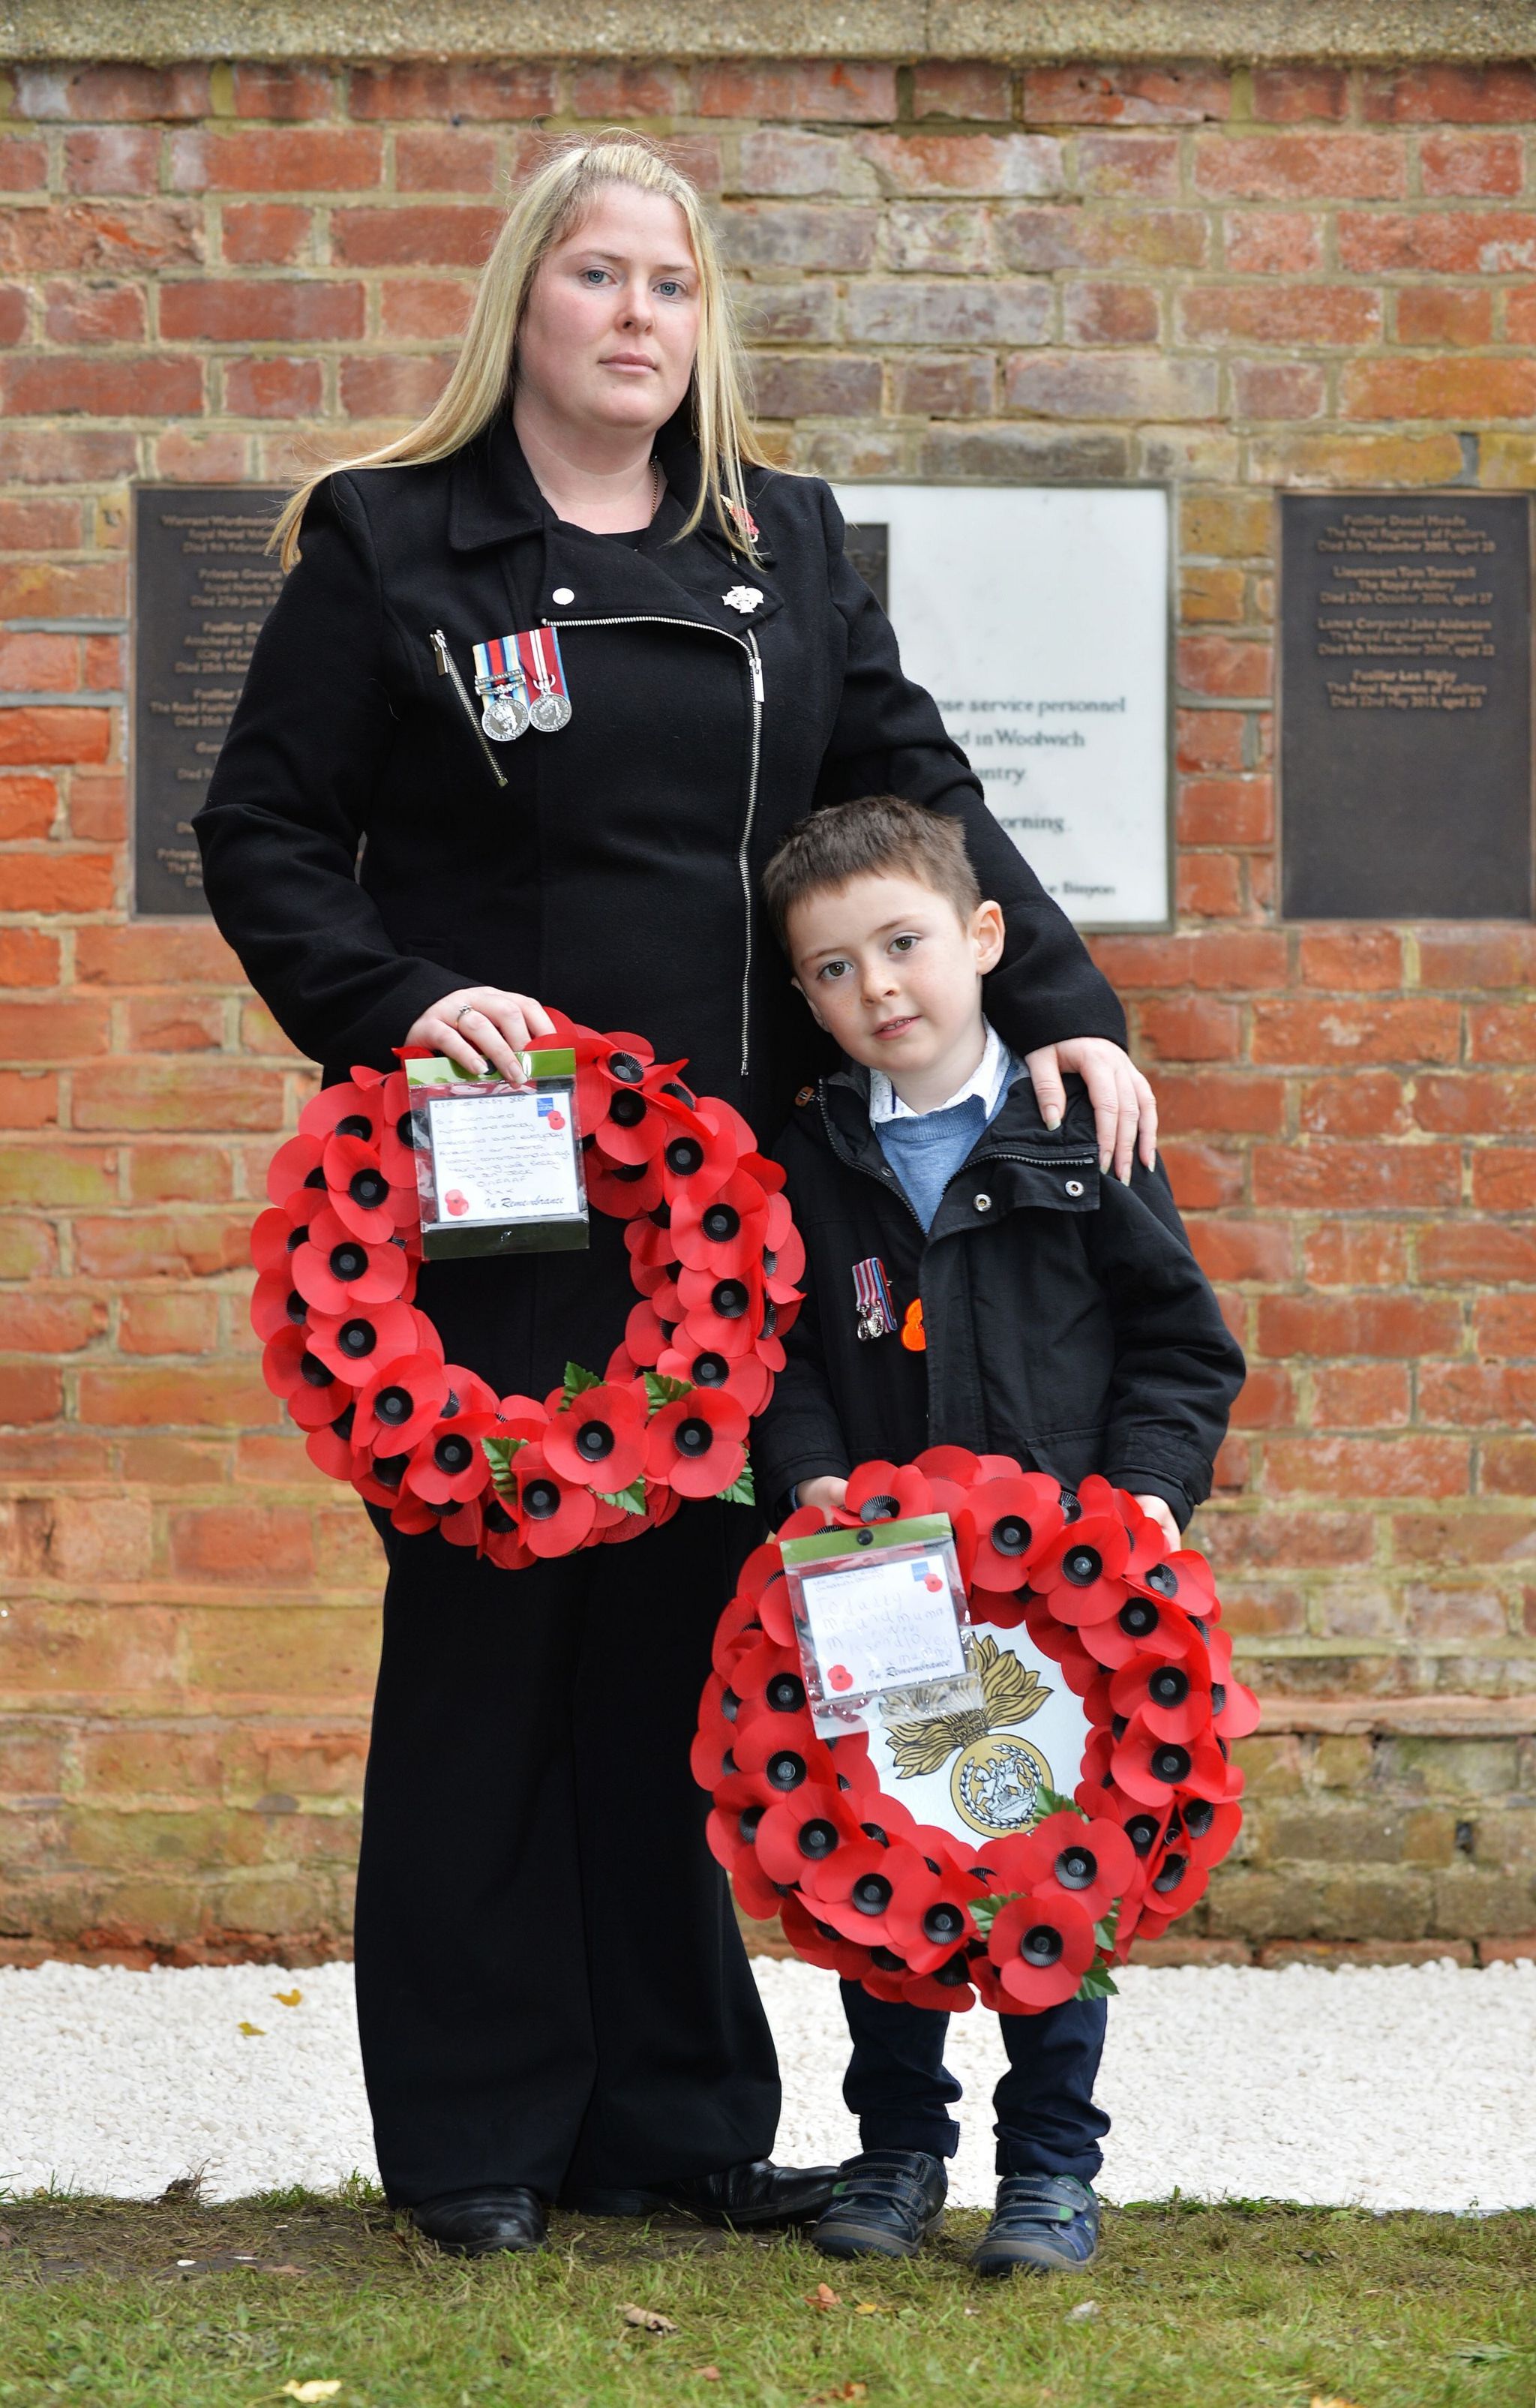 Rebecca Rigby, the widow of murdered Fusilier Lee Rigby, and son Jack